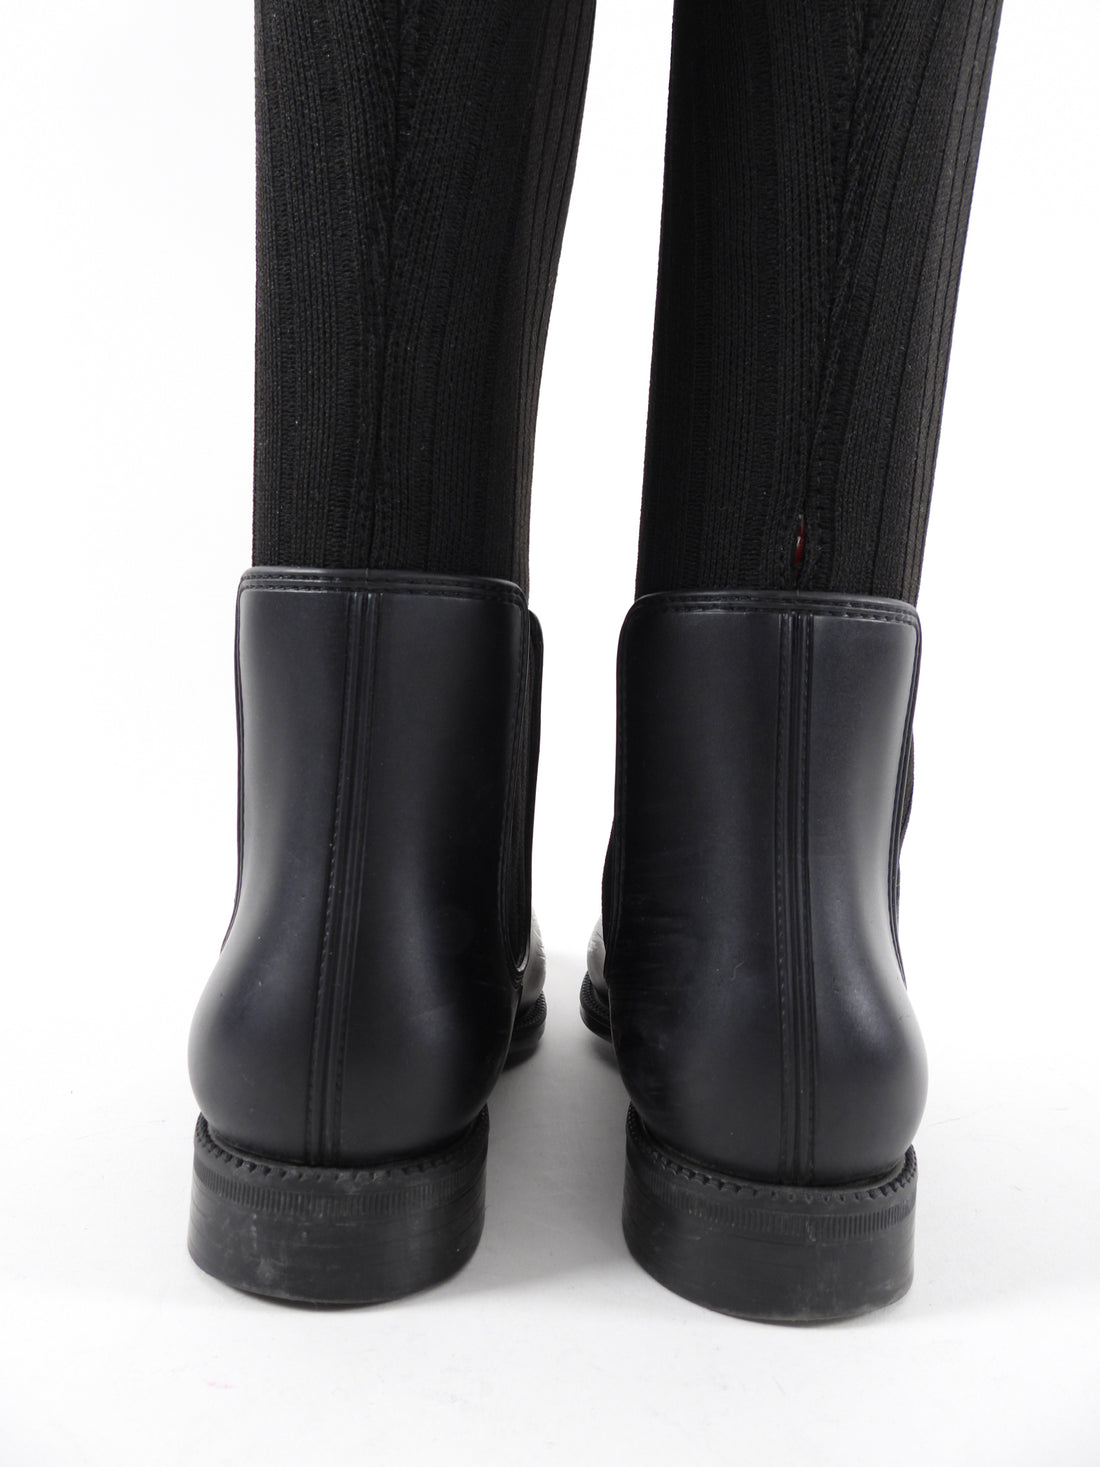 Givenchy Black and Red Stretch Fabric Over the Knee Rubber Boot - 37.5